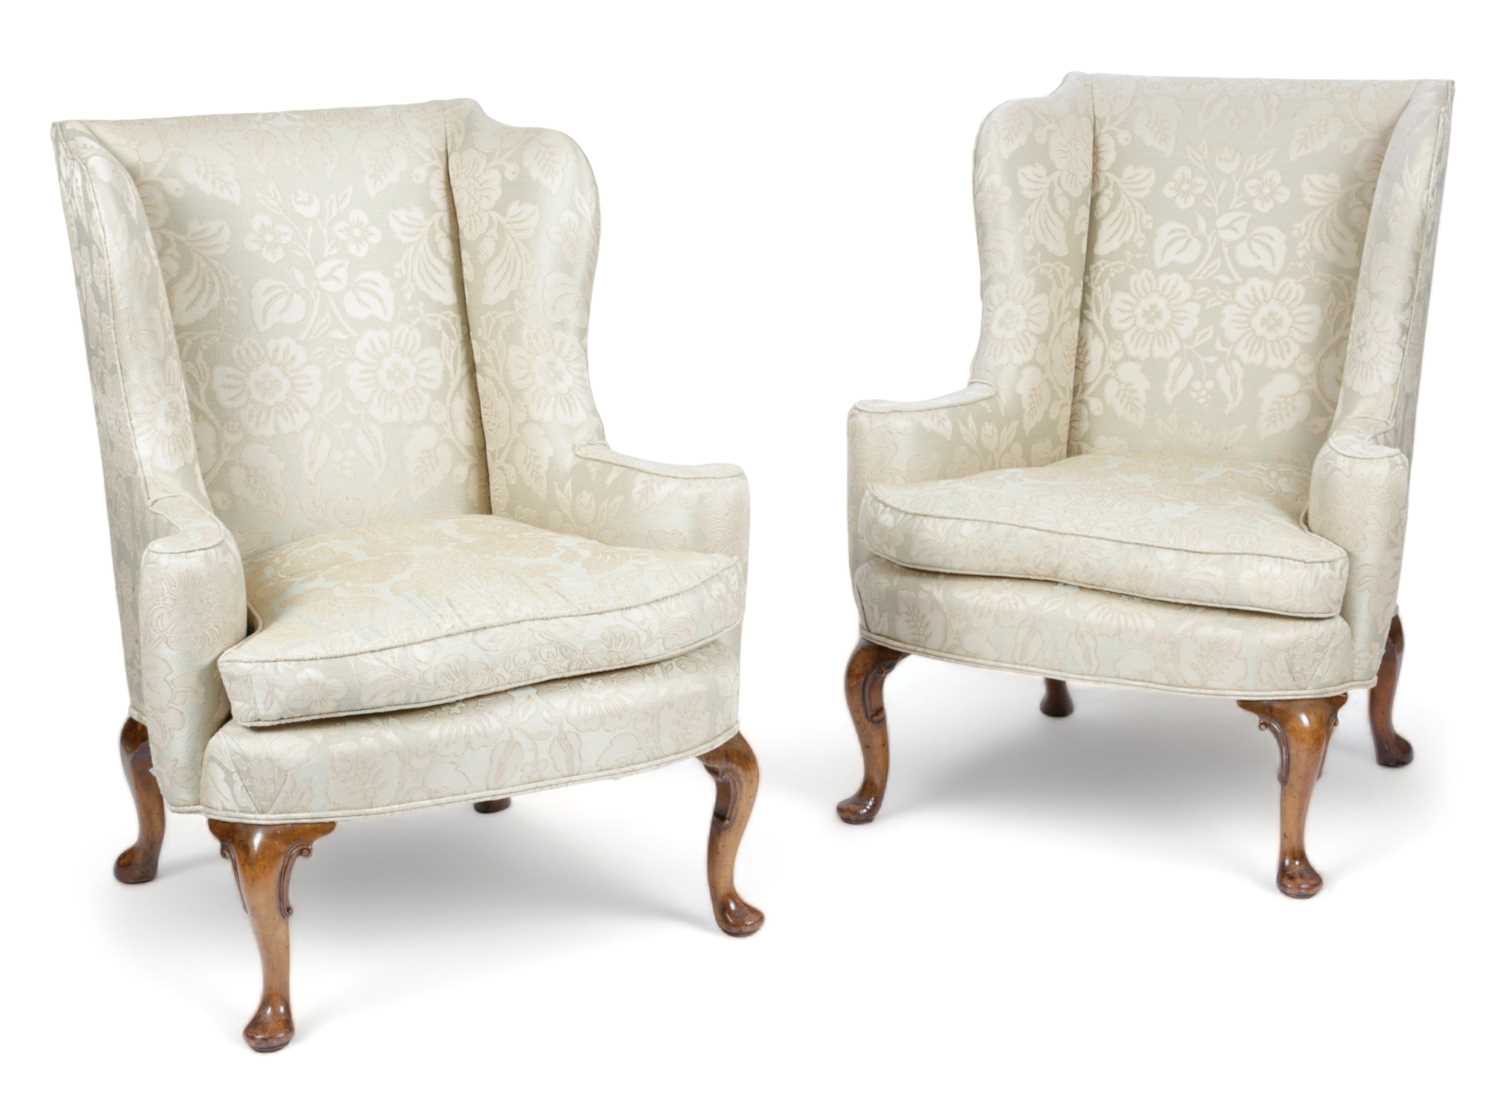 A PAIR WALNUT WING ARMCHAIRS IN QUEEN ANNE STYLE, LATE 19TH CENTURY each with an upholstered back, - Image 3 of 3